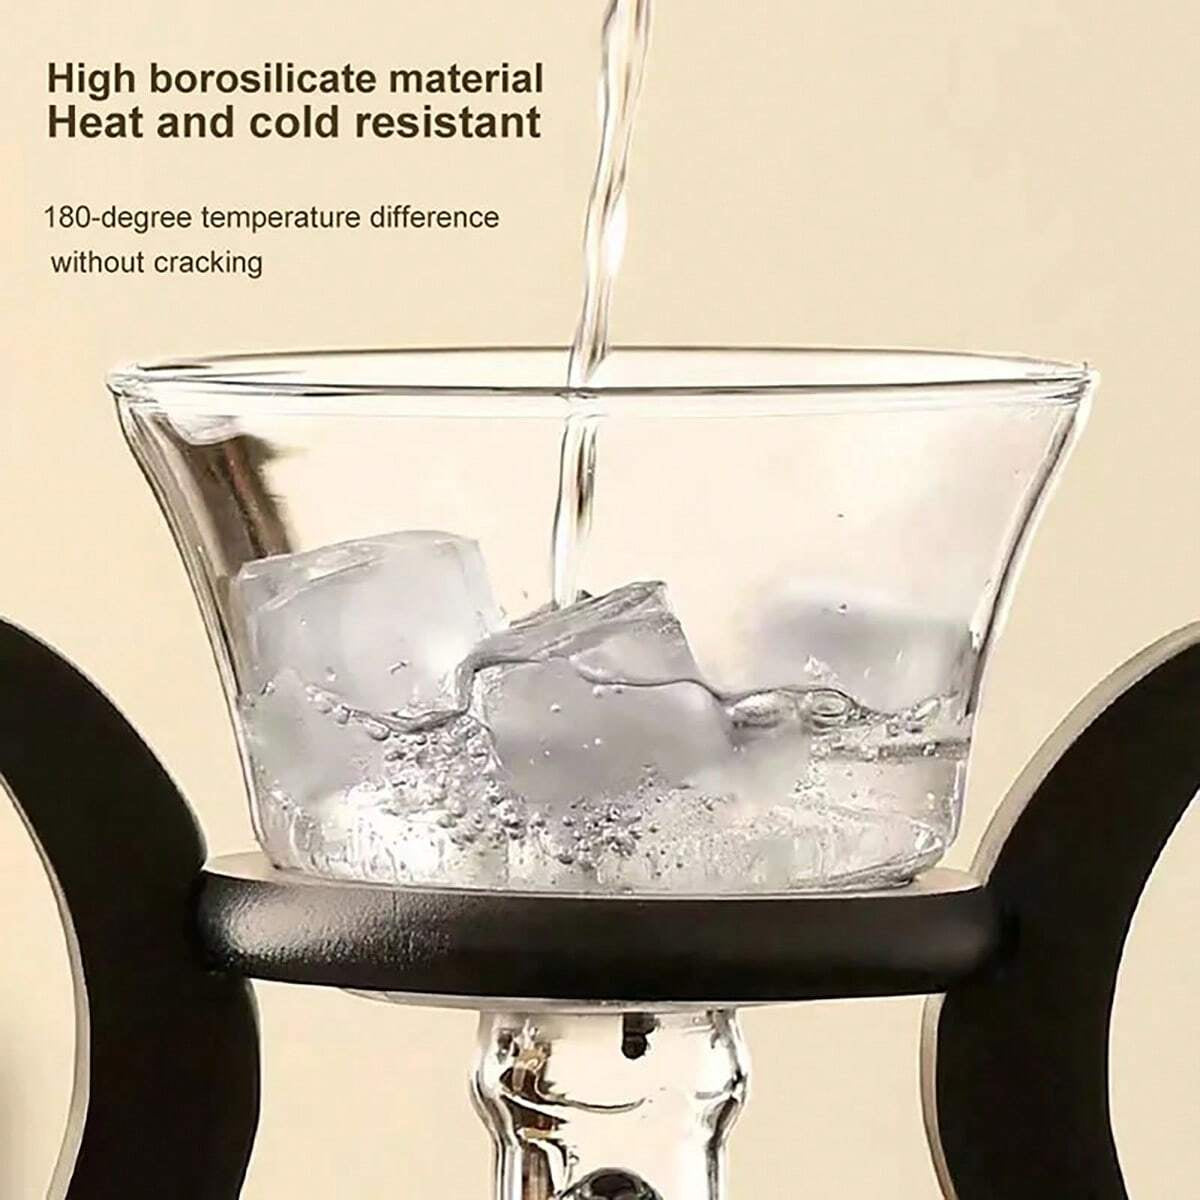 Heat-Resistant Glass Tea Set Magnetic Water Diversion Rotating Cover Bowl Automatic Tea Maker Lazy Kungfu Teapot Drinking